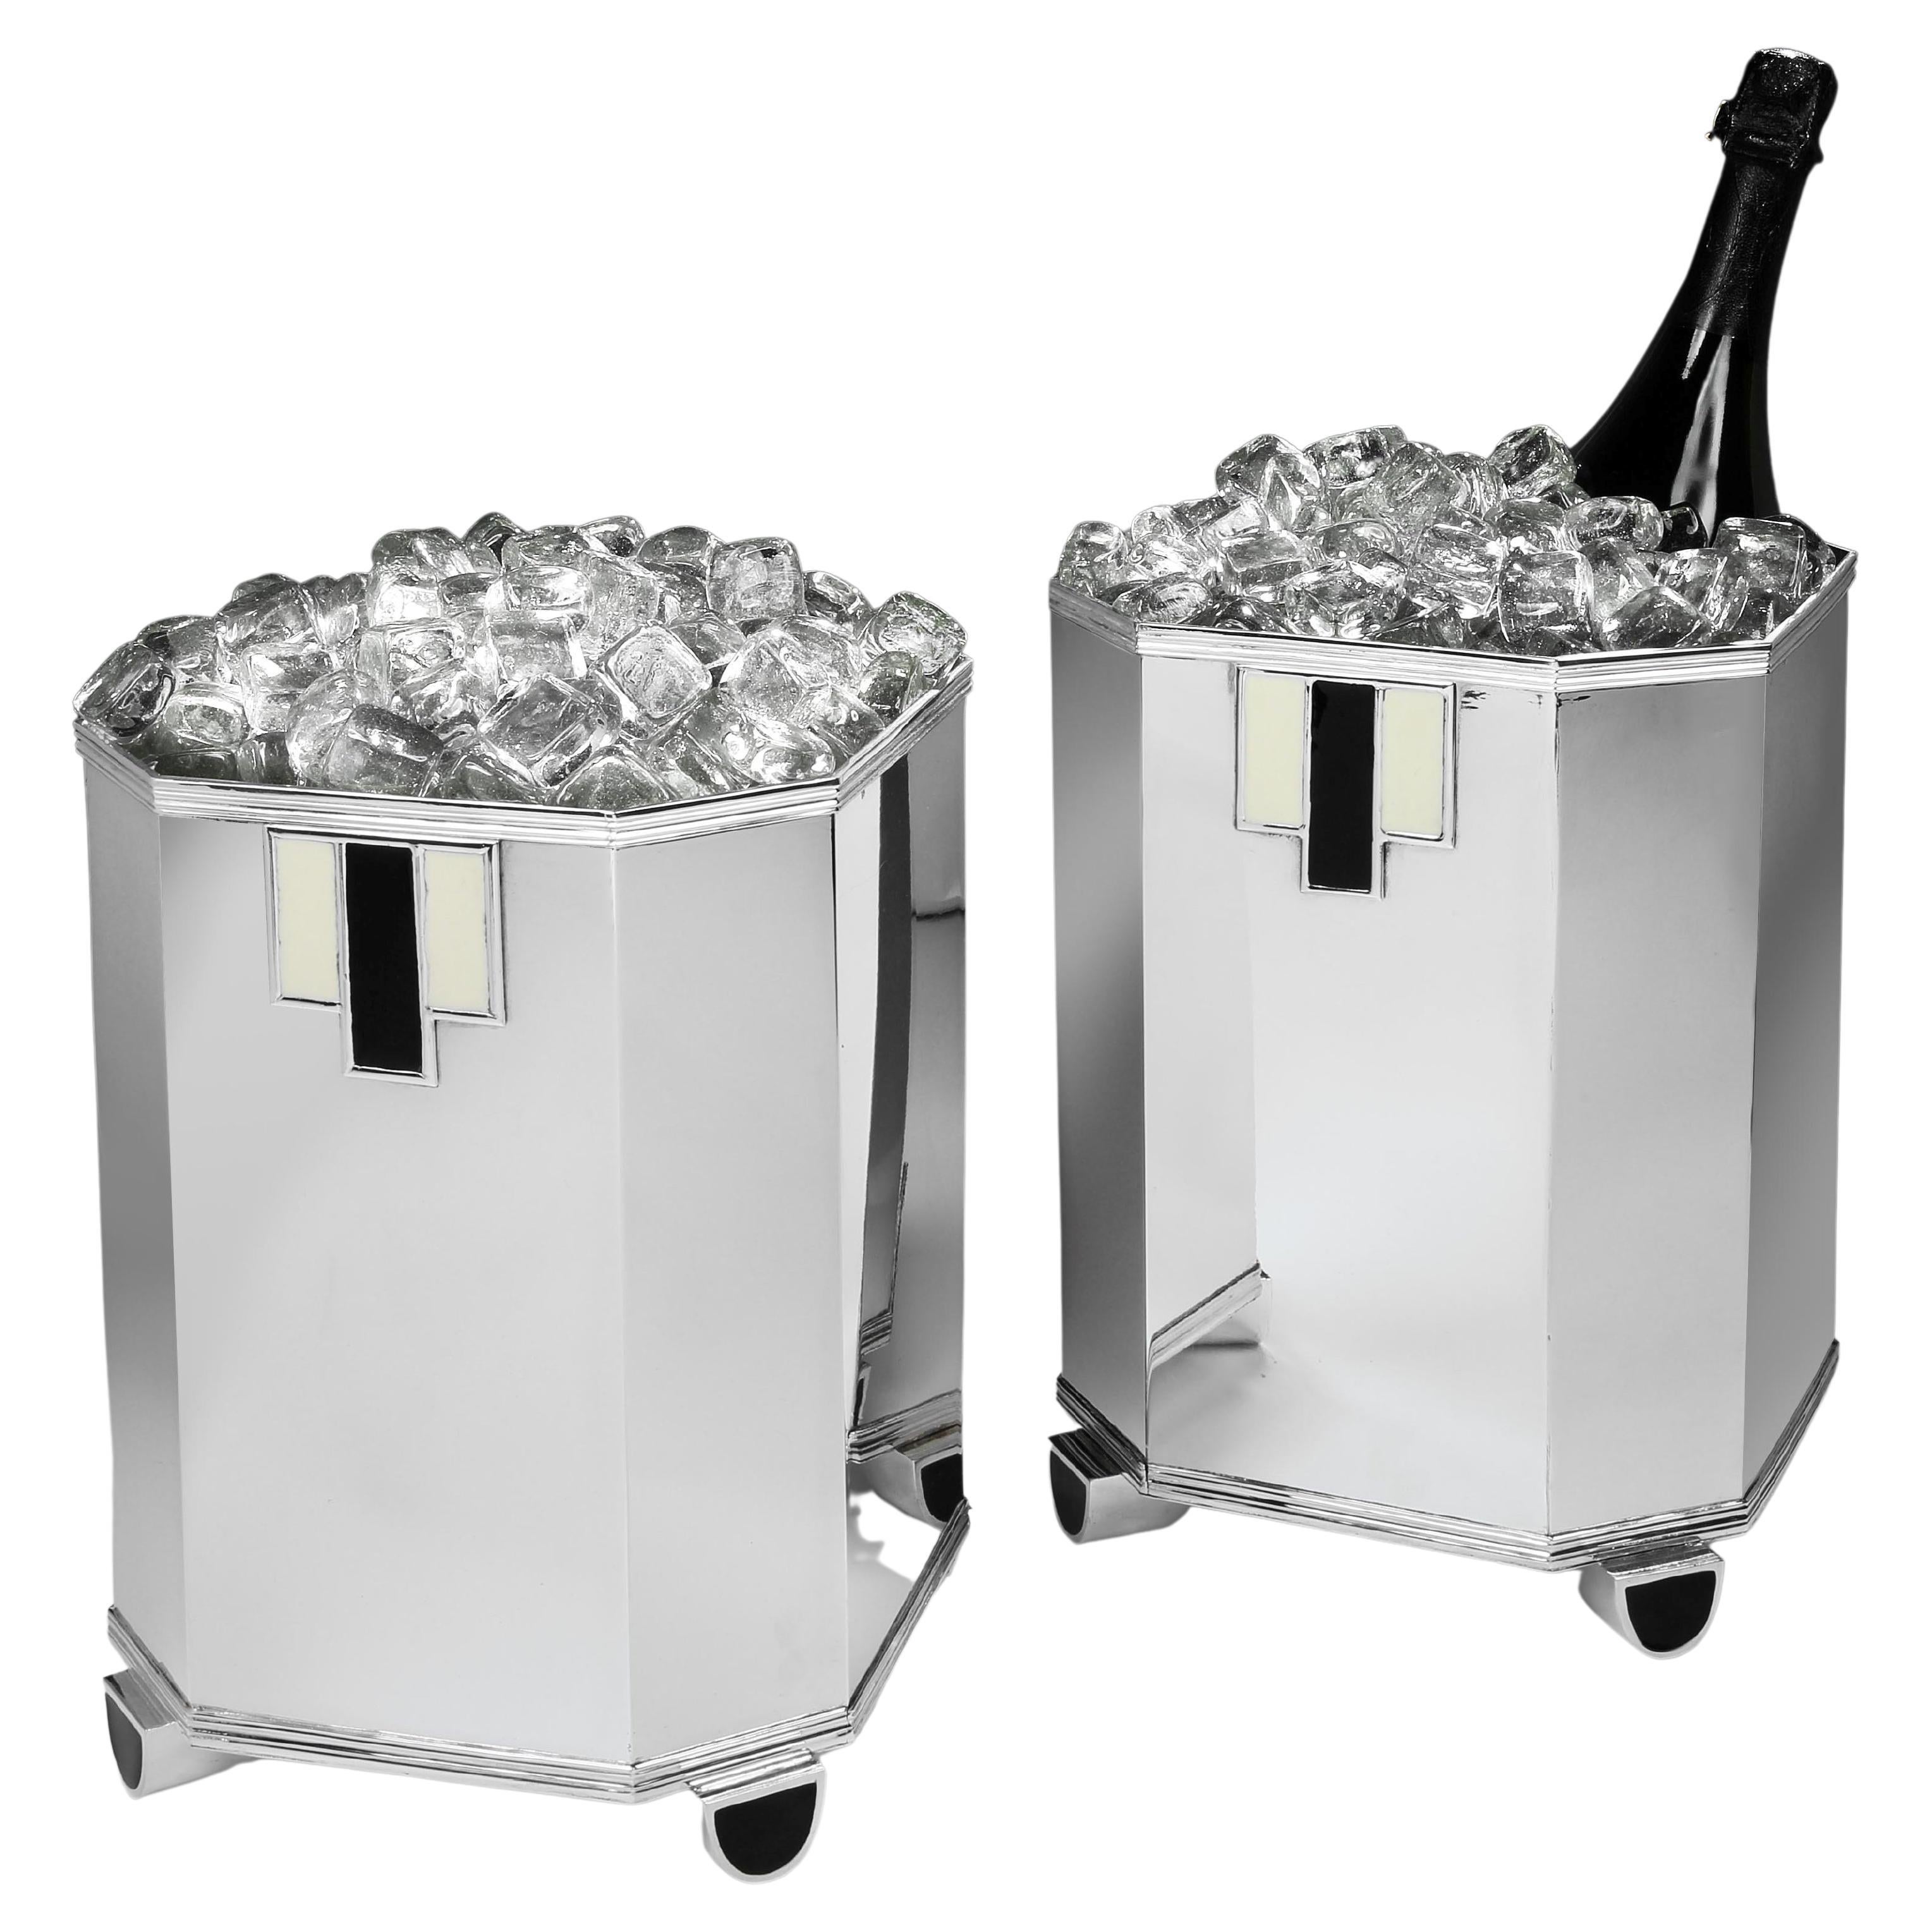 Art Deco Sterling Silver Champagne Coolers by Cardeilhac, 1930s